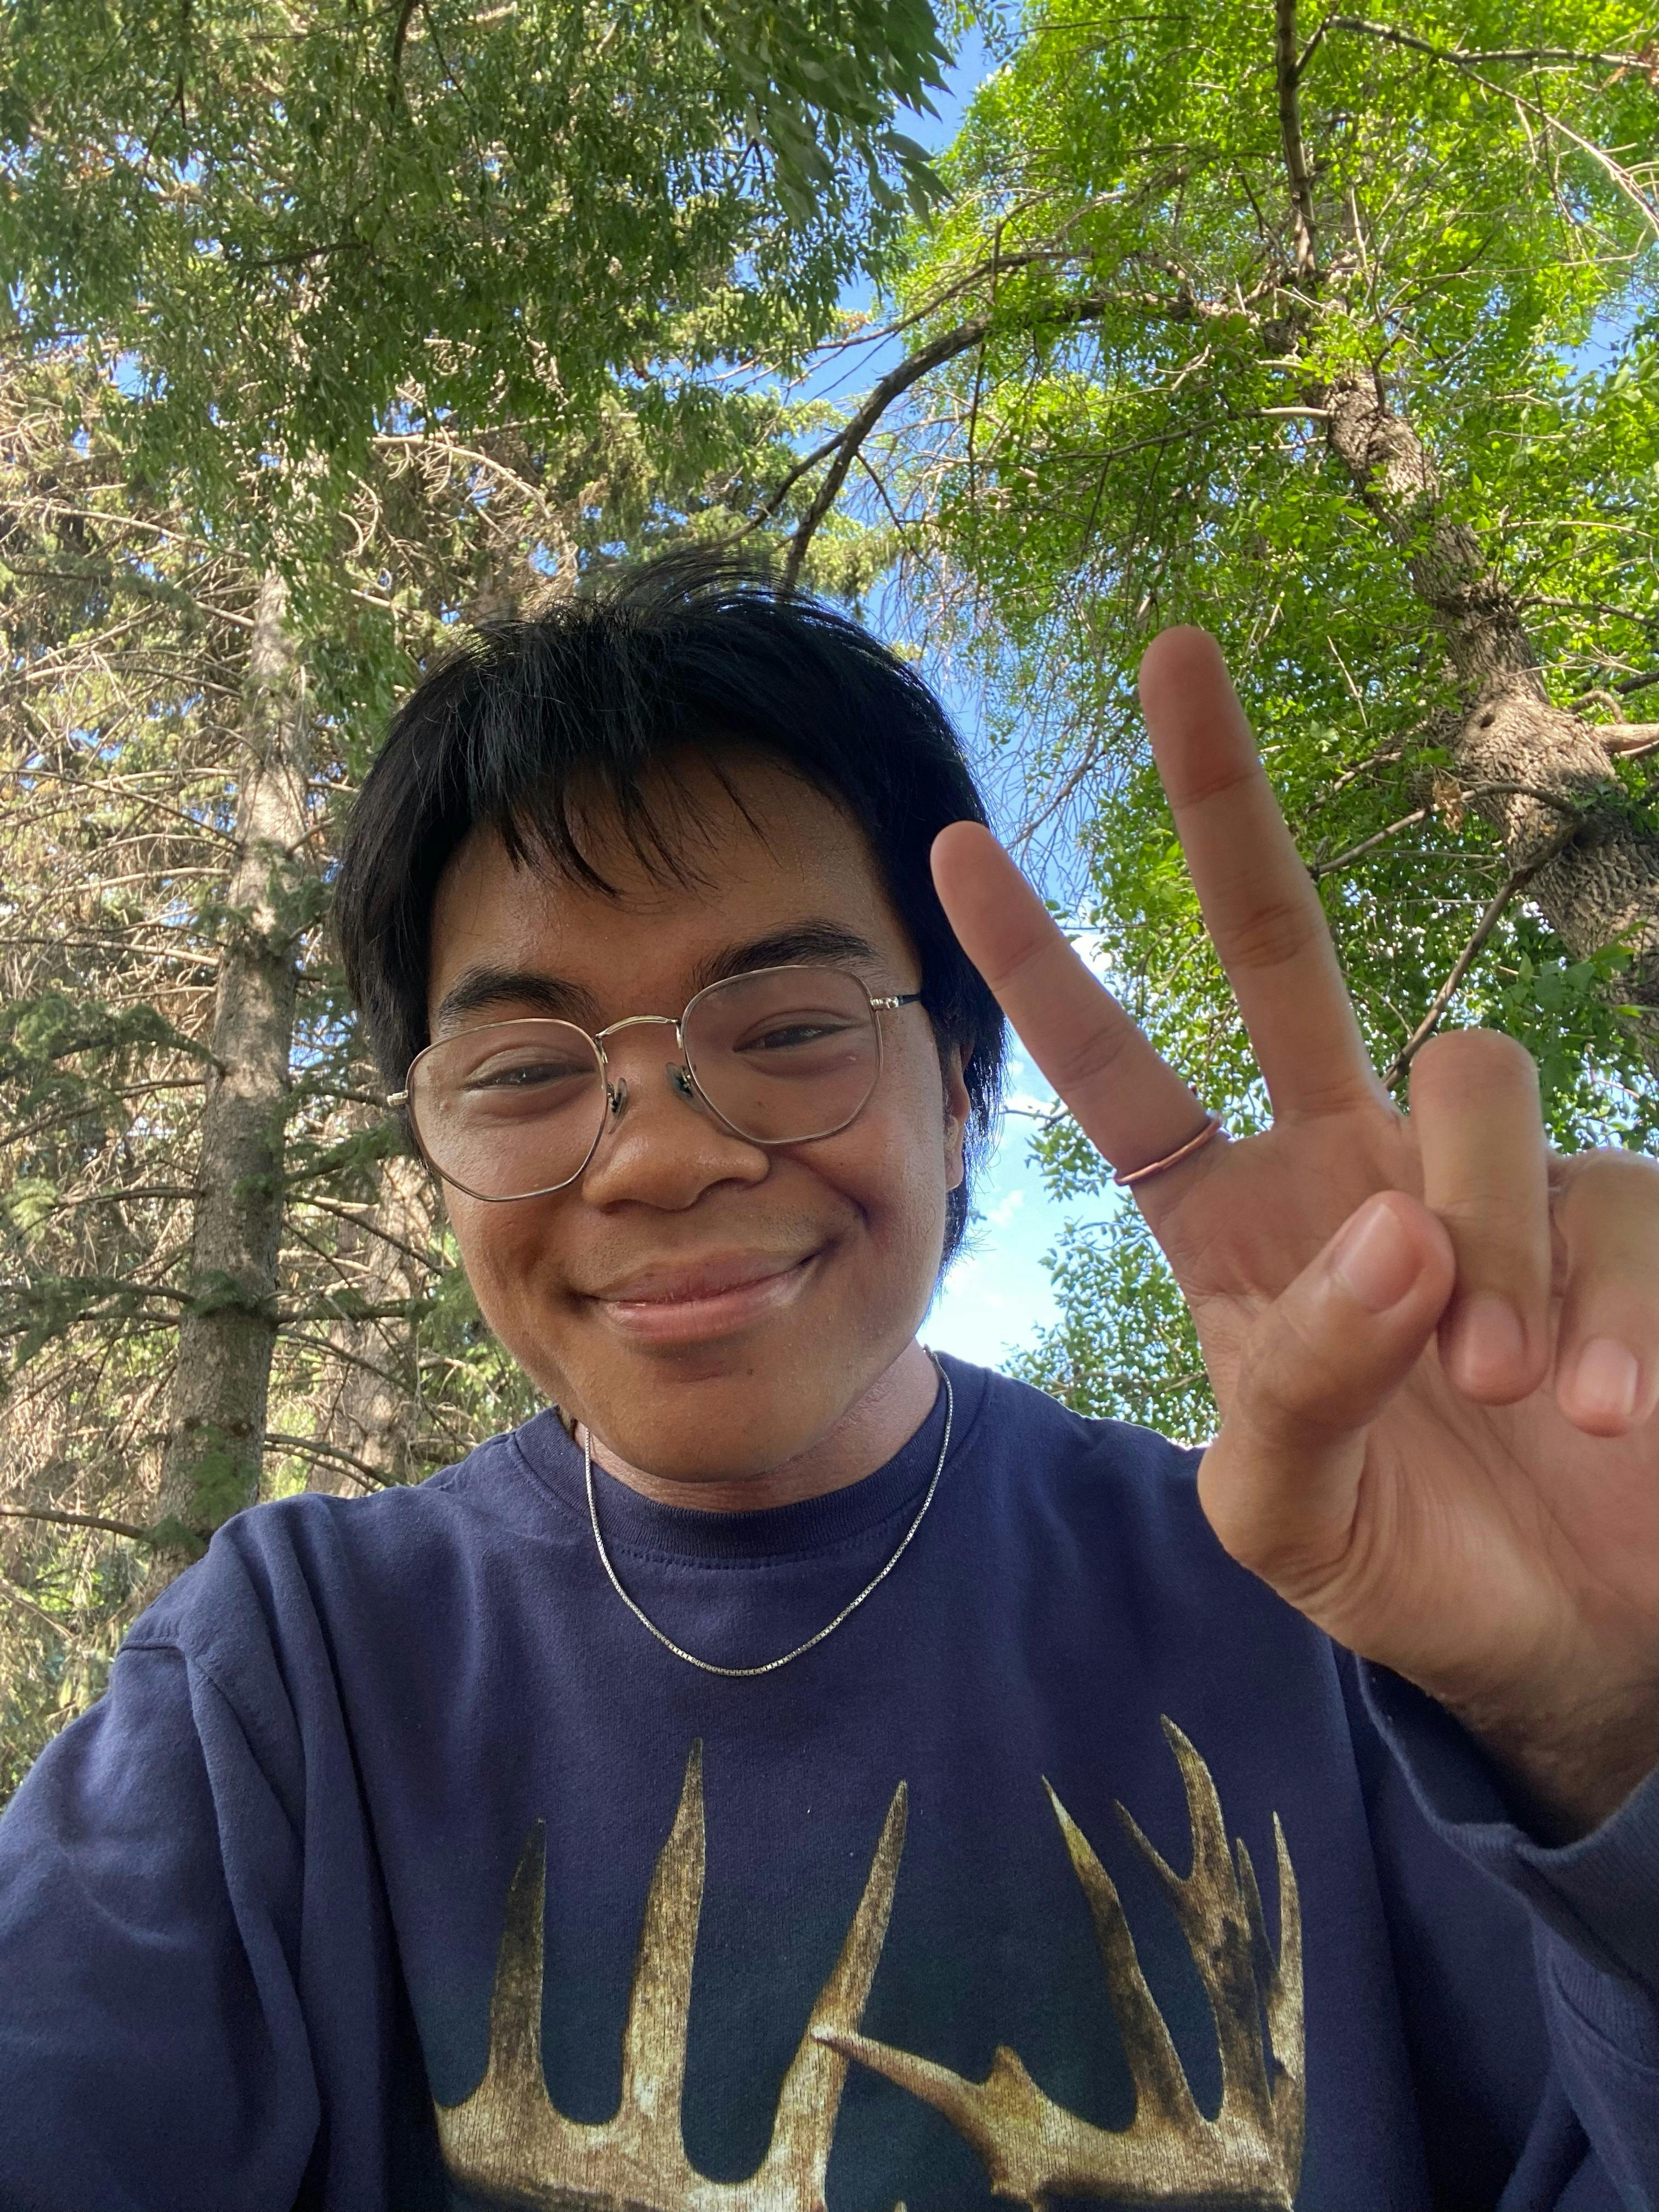 headshot of Daniel Volante. Daniel has short black hair, wears square-rimed glasses and is wearing a thin silver necklace. He is wearing a blue pull-over sweater with antlers on it. Daniel is smiling and holding up his left hand with the "peace" sign. His index finger has a thin gold ring on it